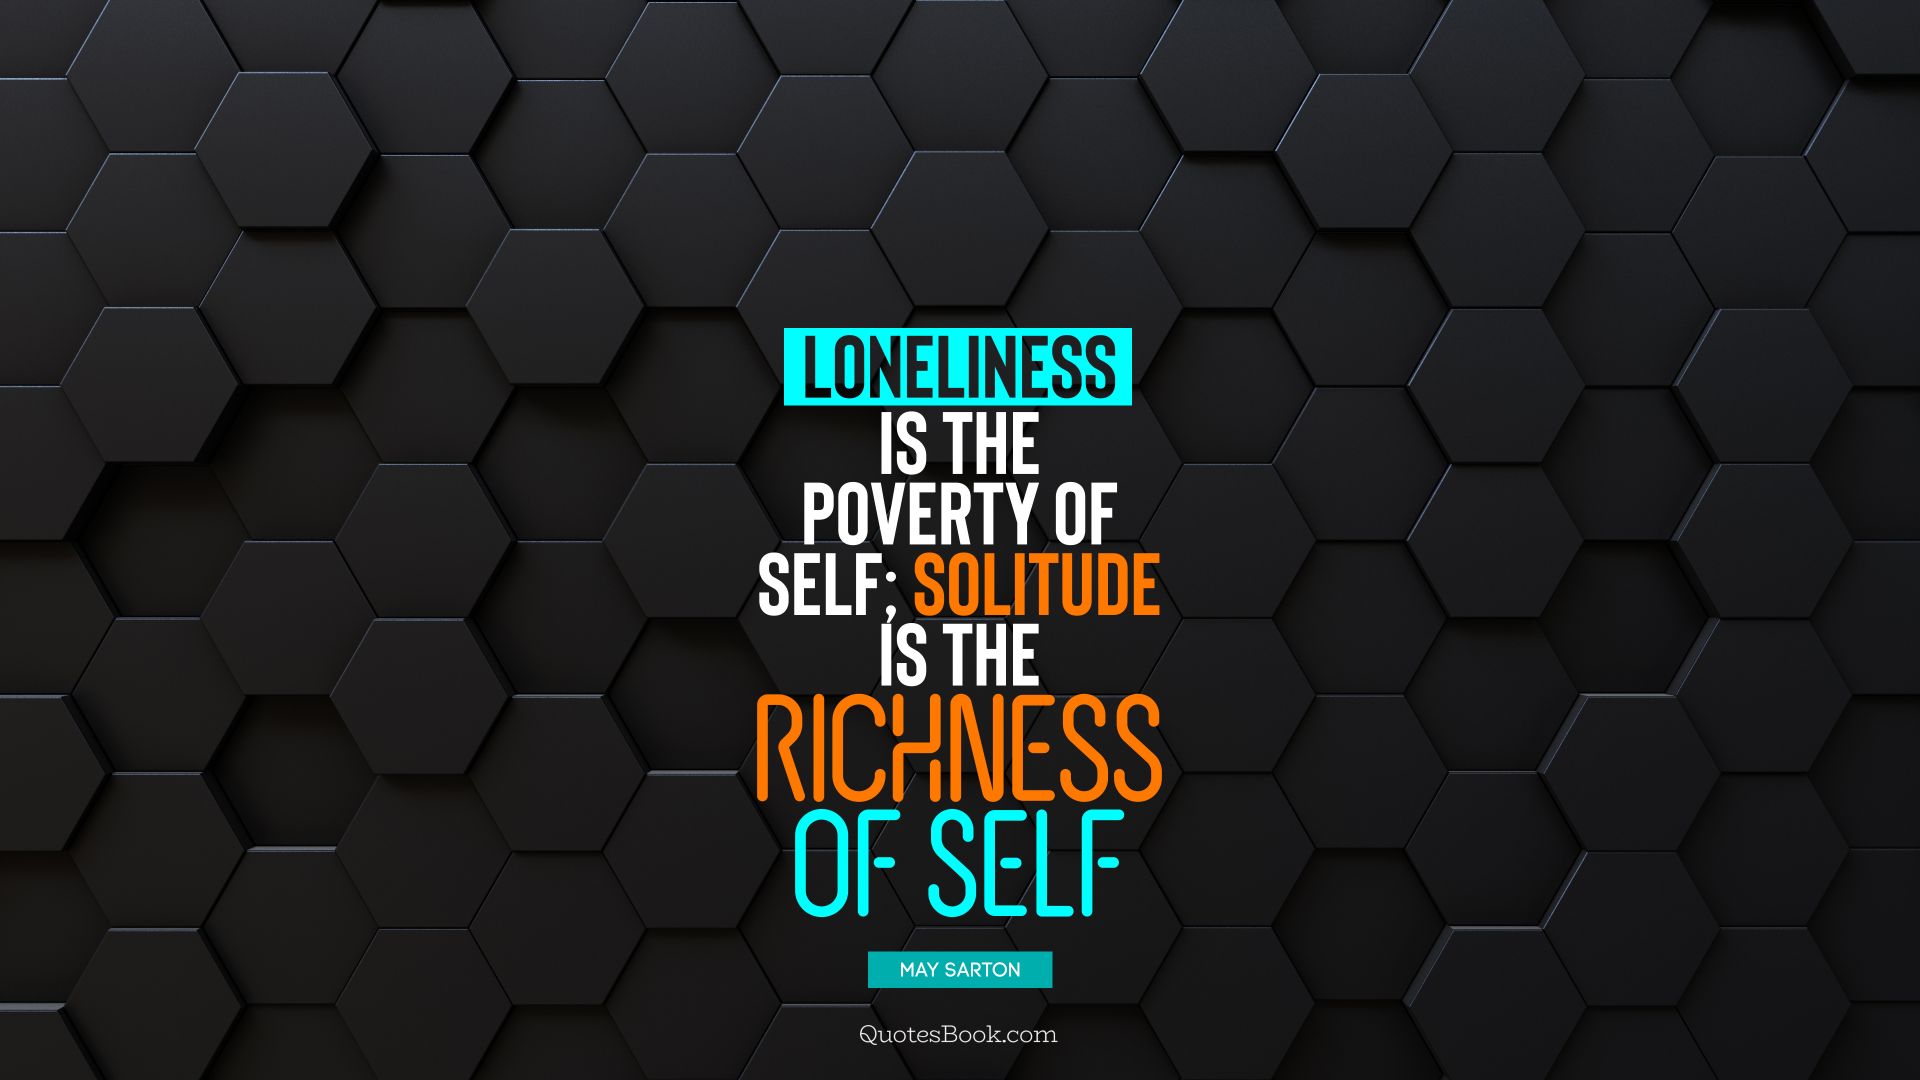 Loneliness is the poverty of self; solitude is the richness of self. - Quote by May Sarton